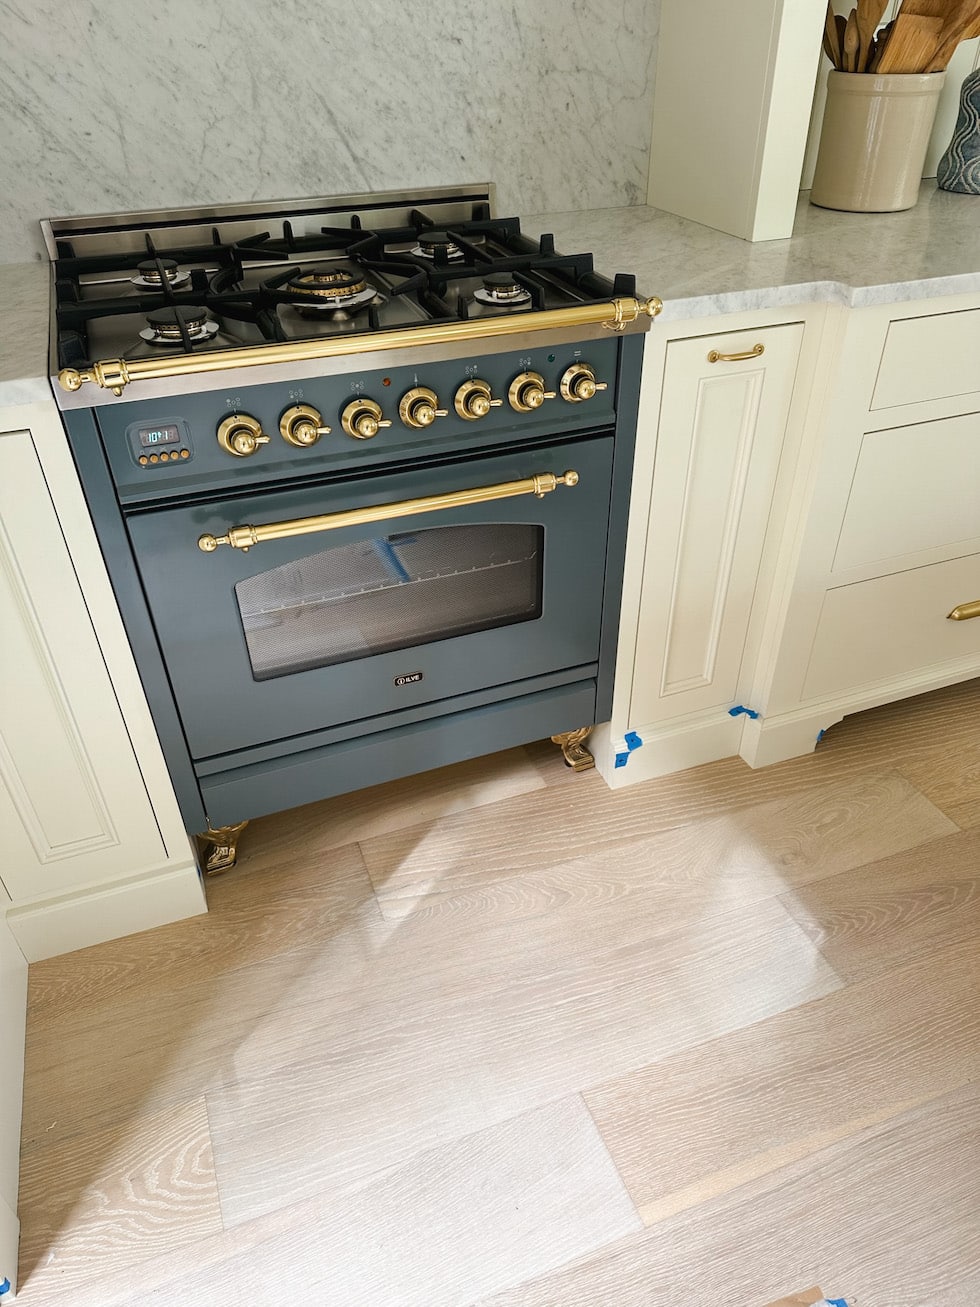 Welcome to our Kitchen, Beatrix! (Meet Our Blue Ilve Range)